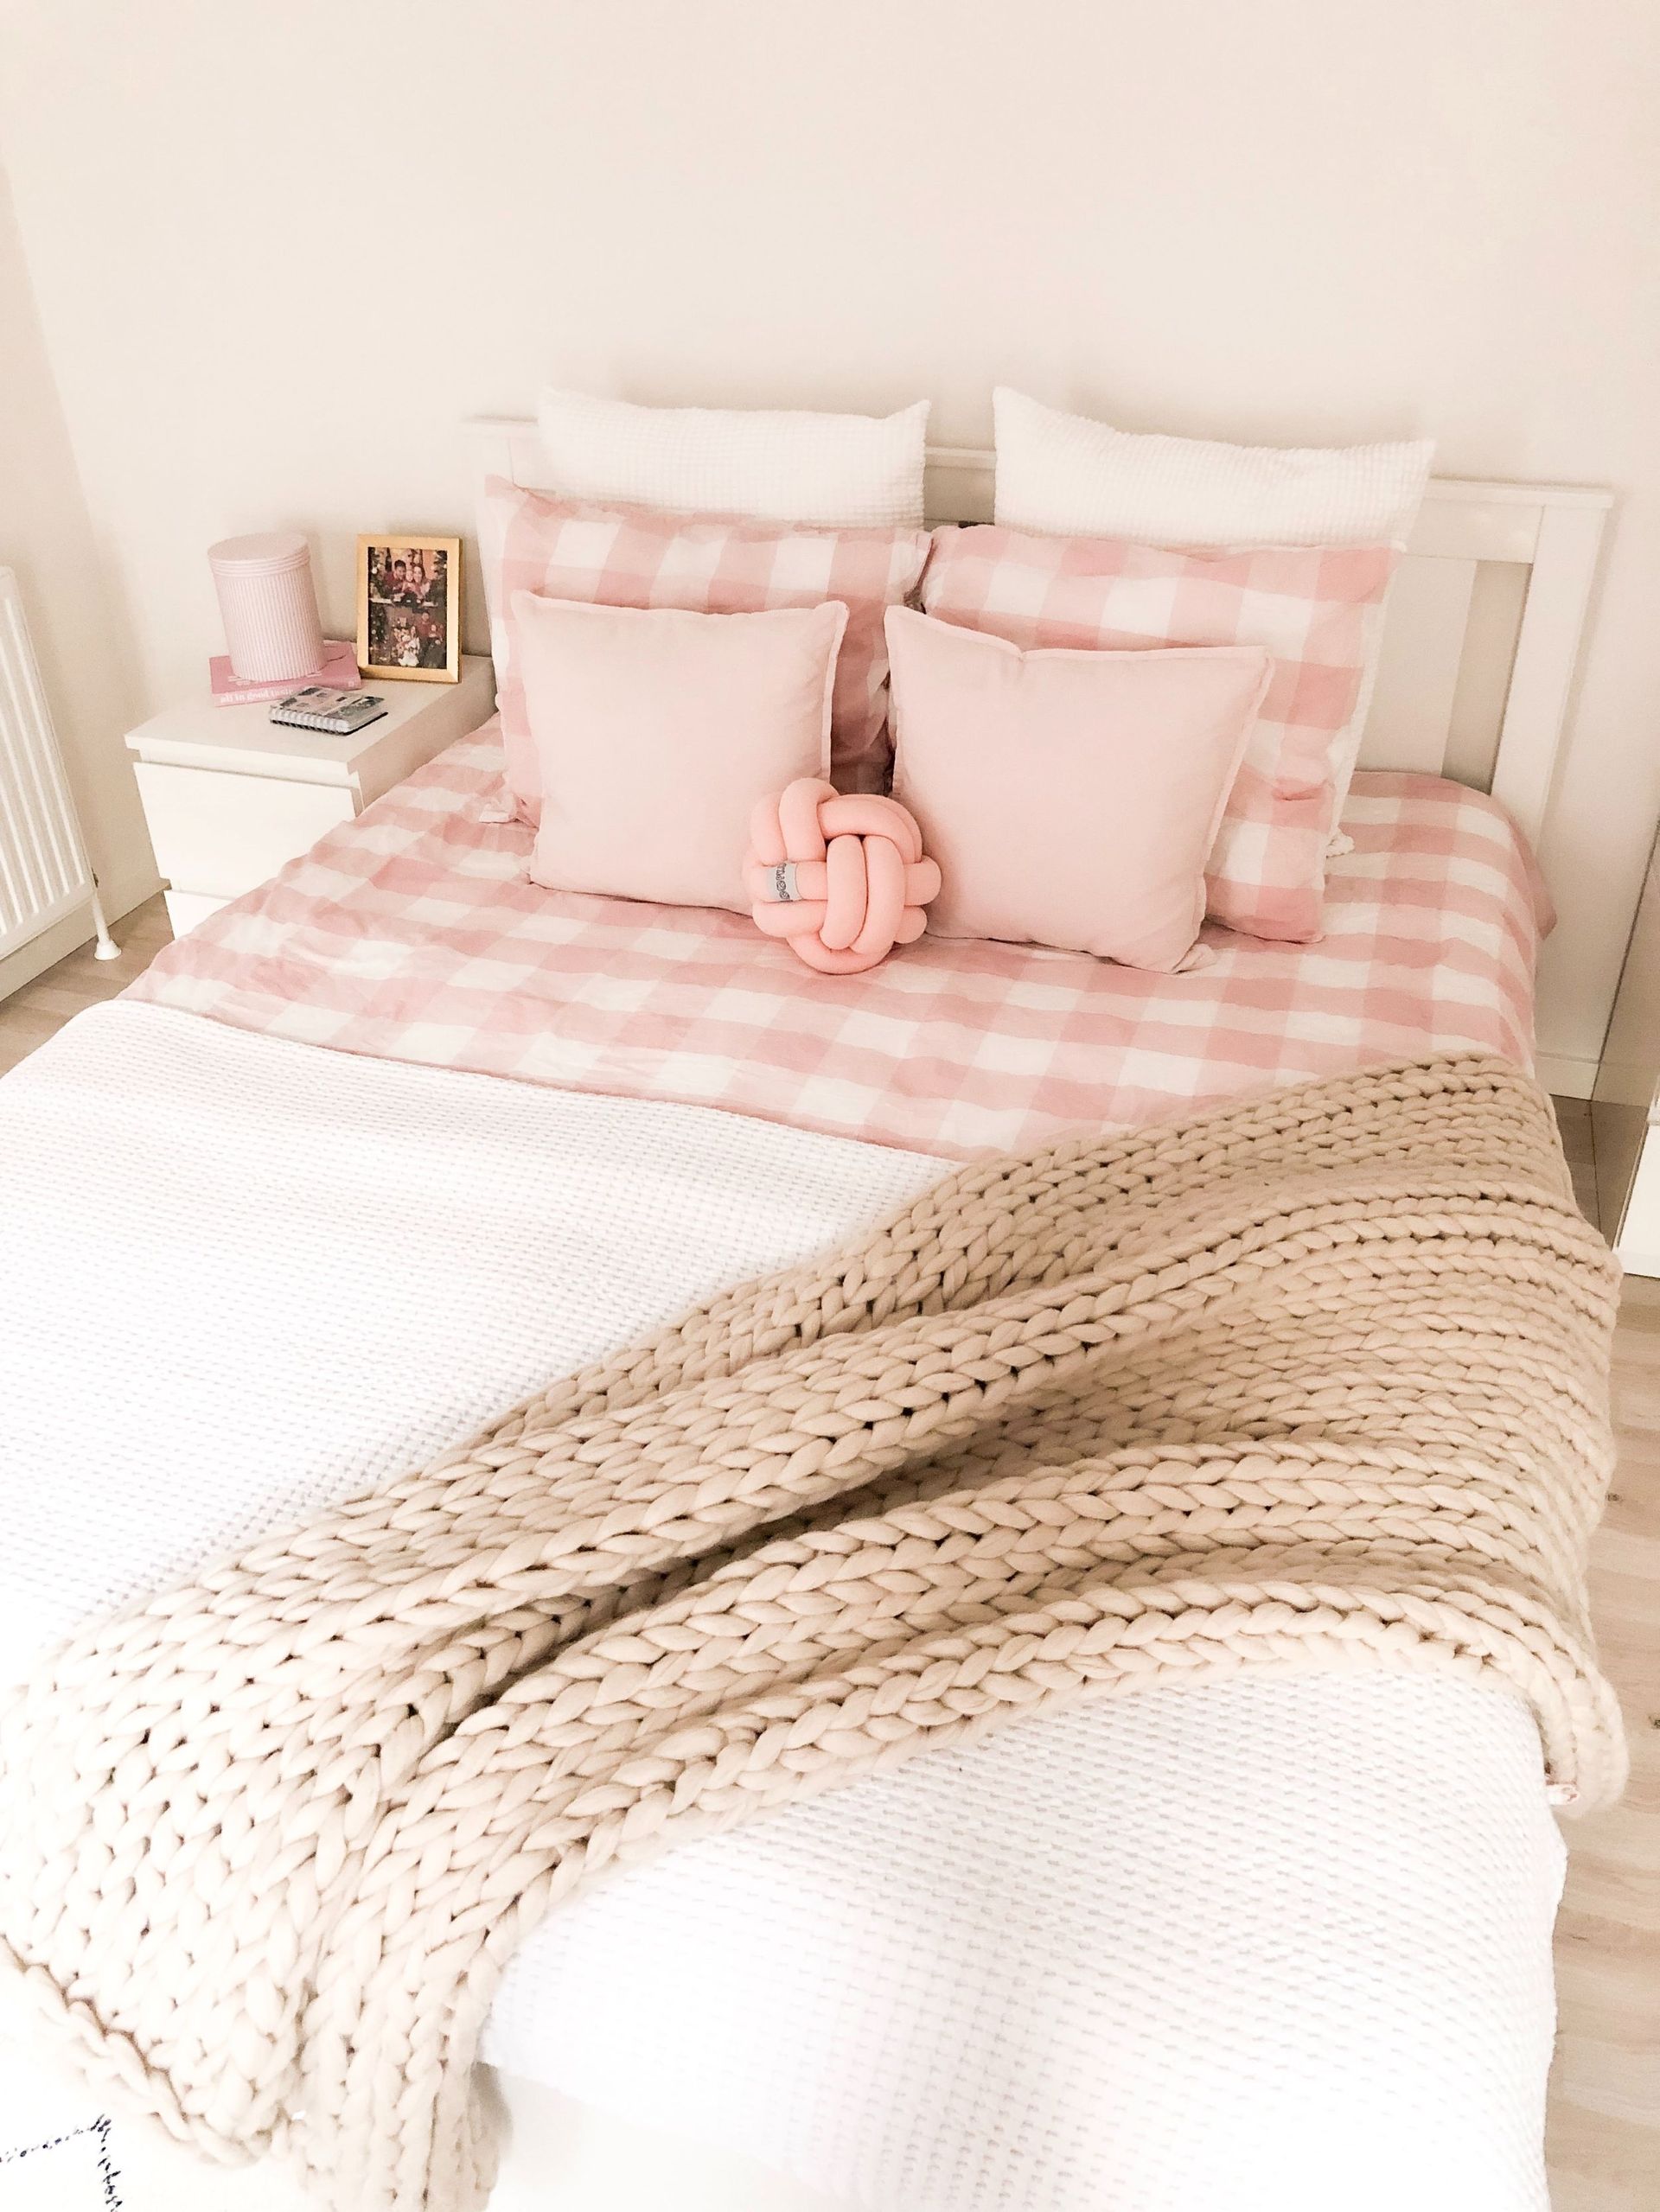 Bed with white and pink comforter